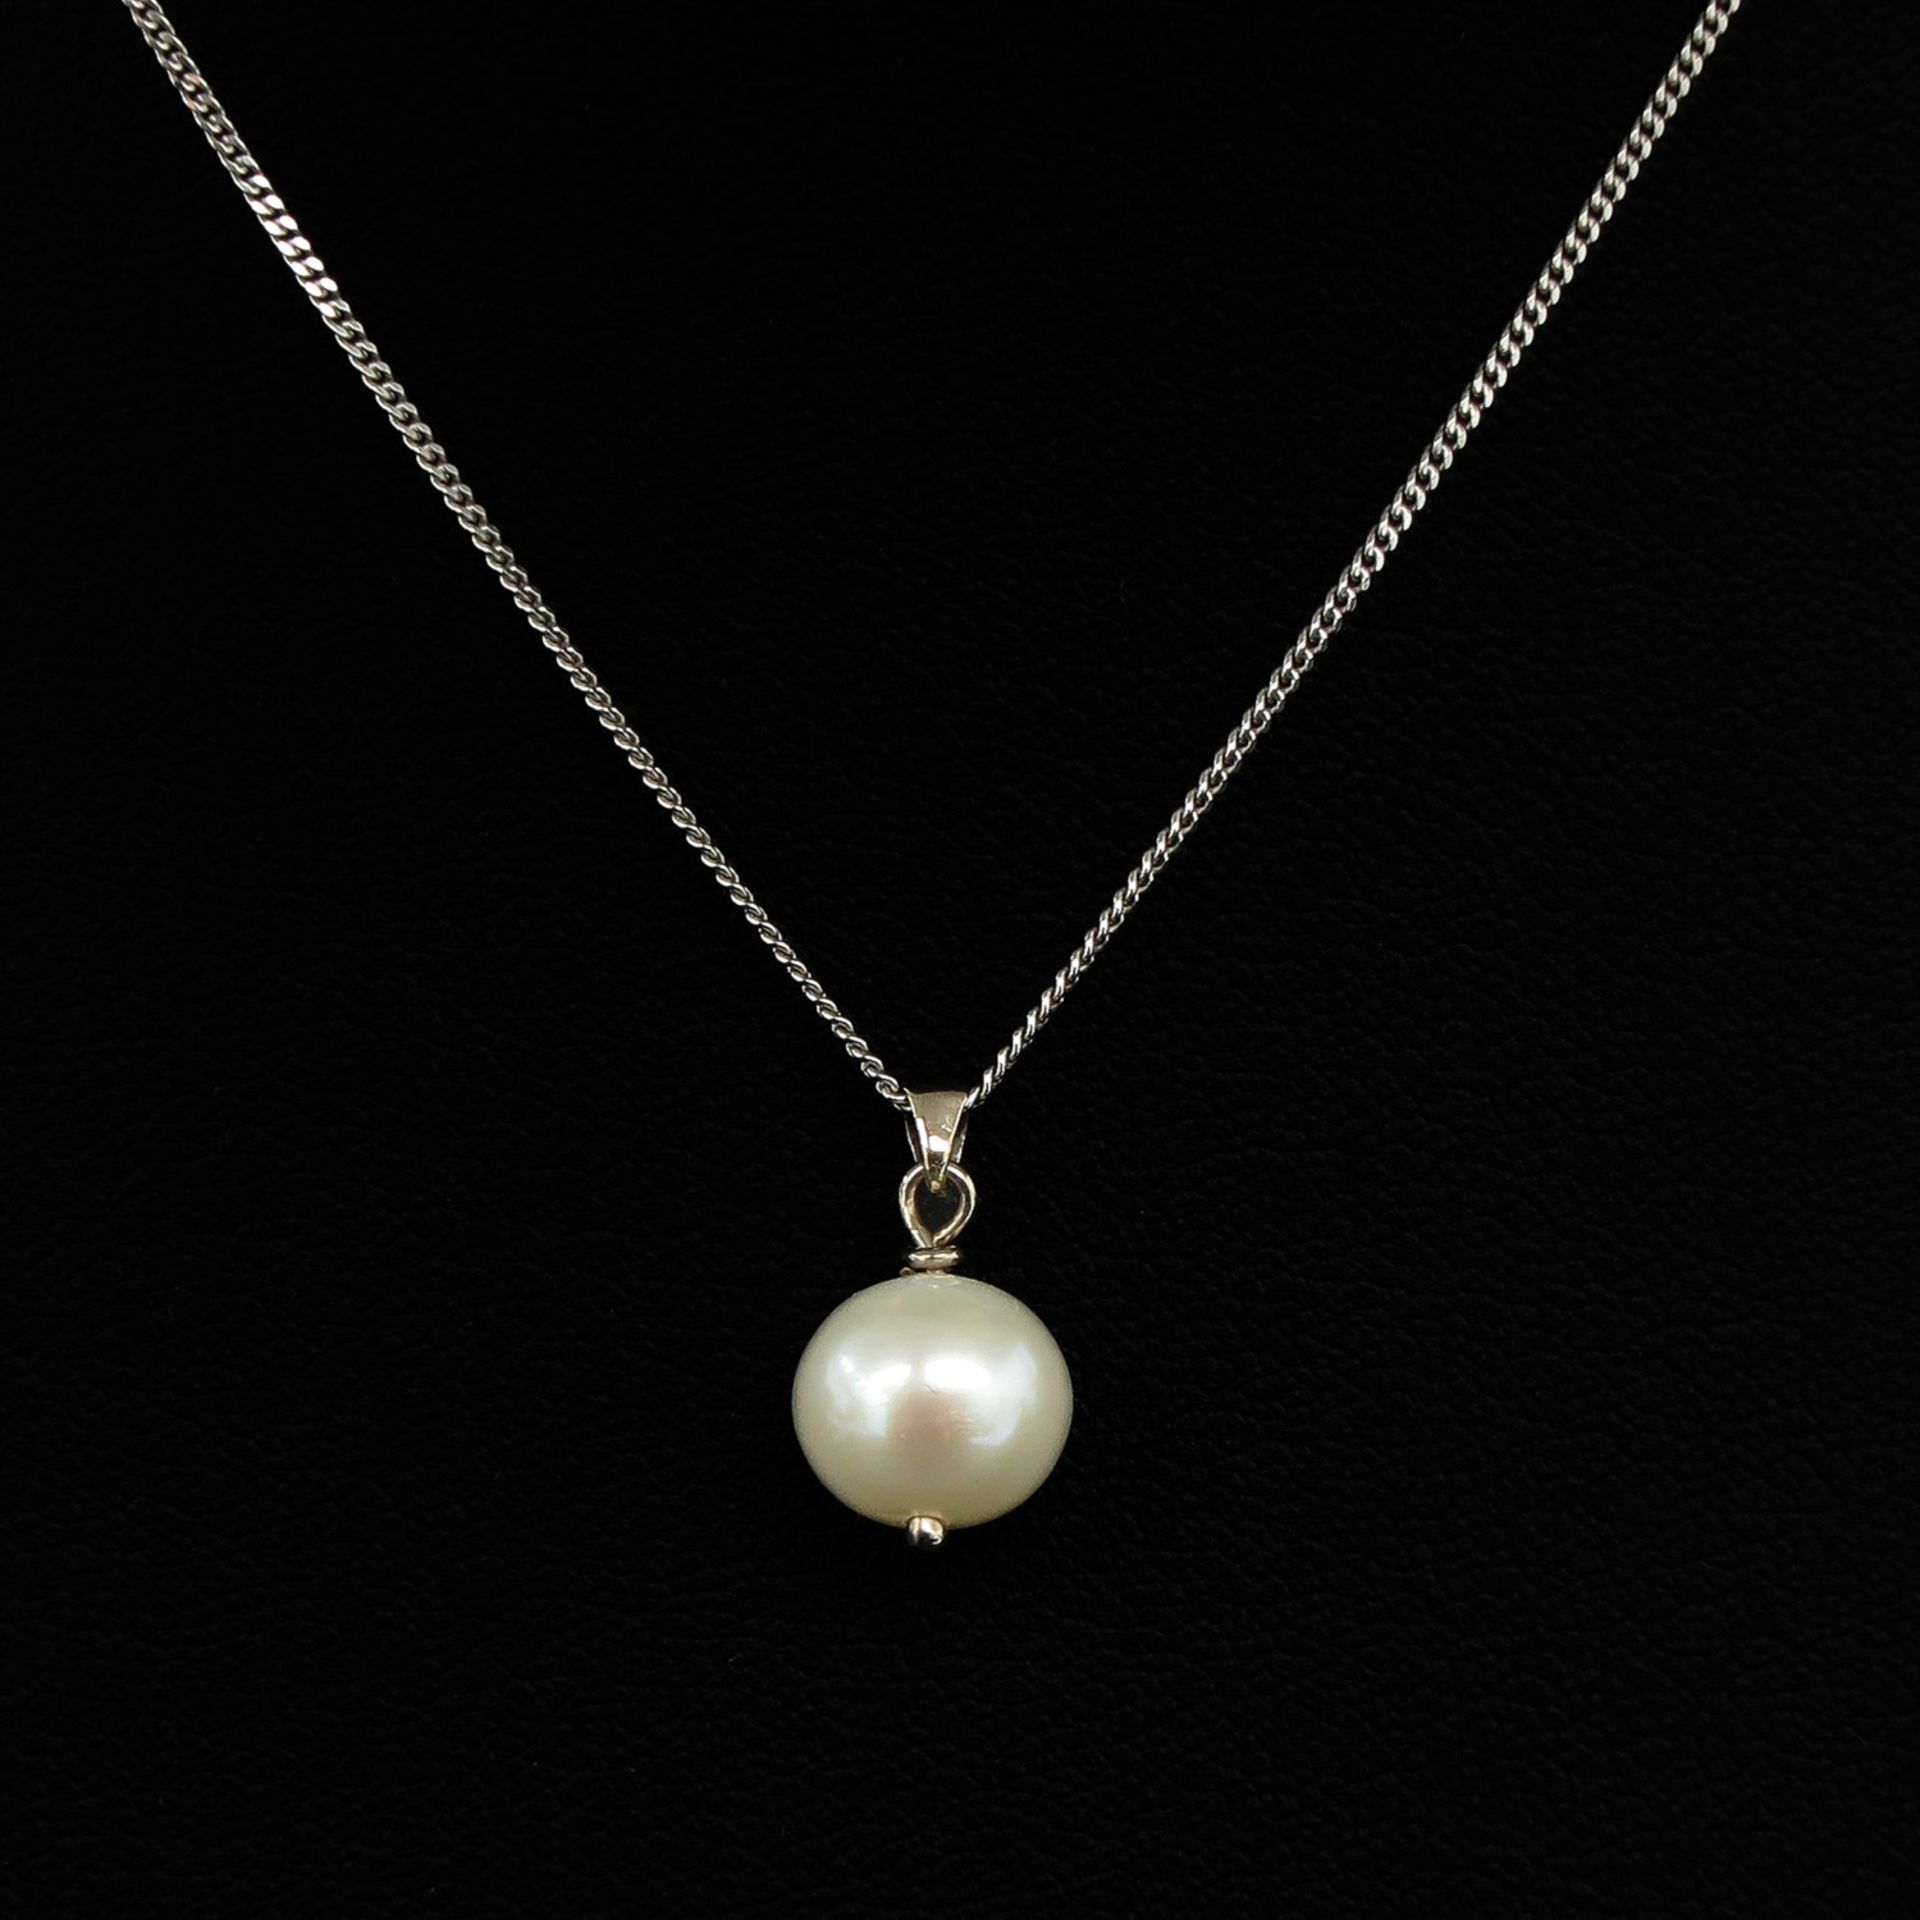 A 14KG Necklace with Pearl - Image 2 of 4